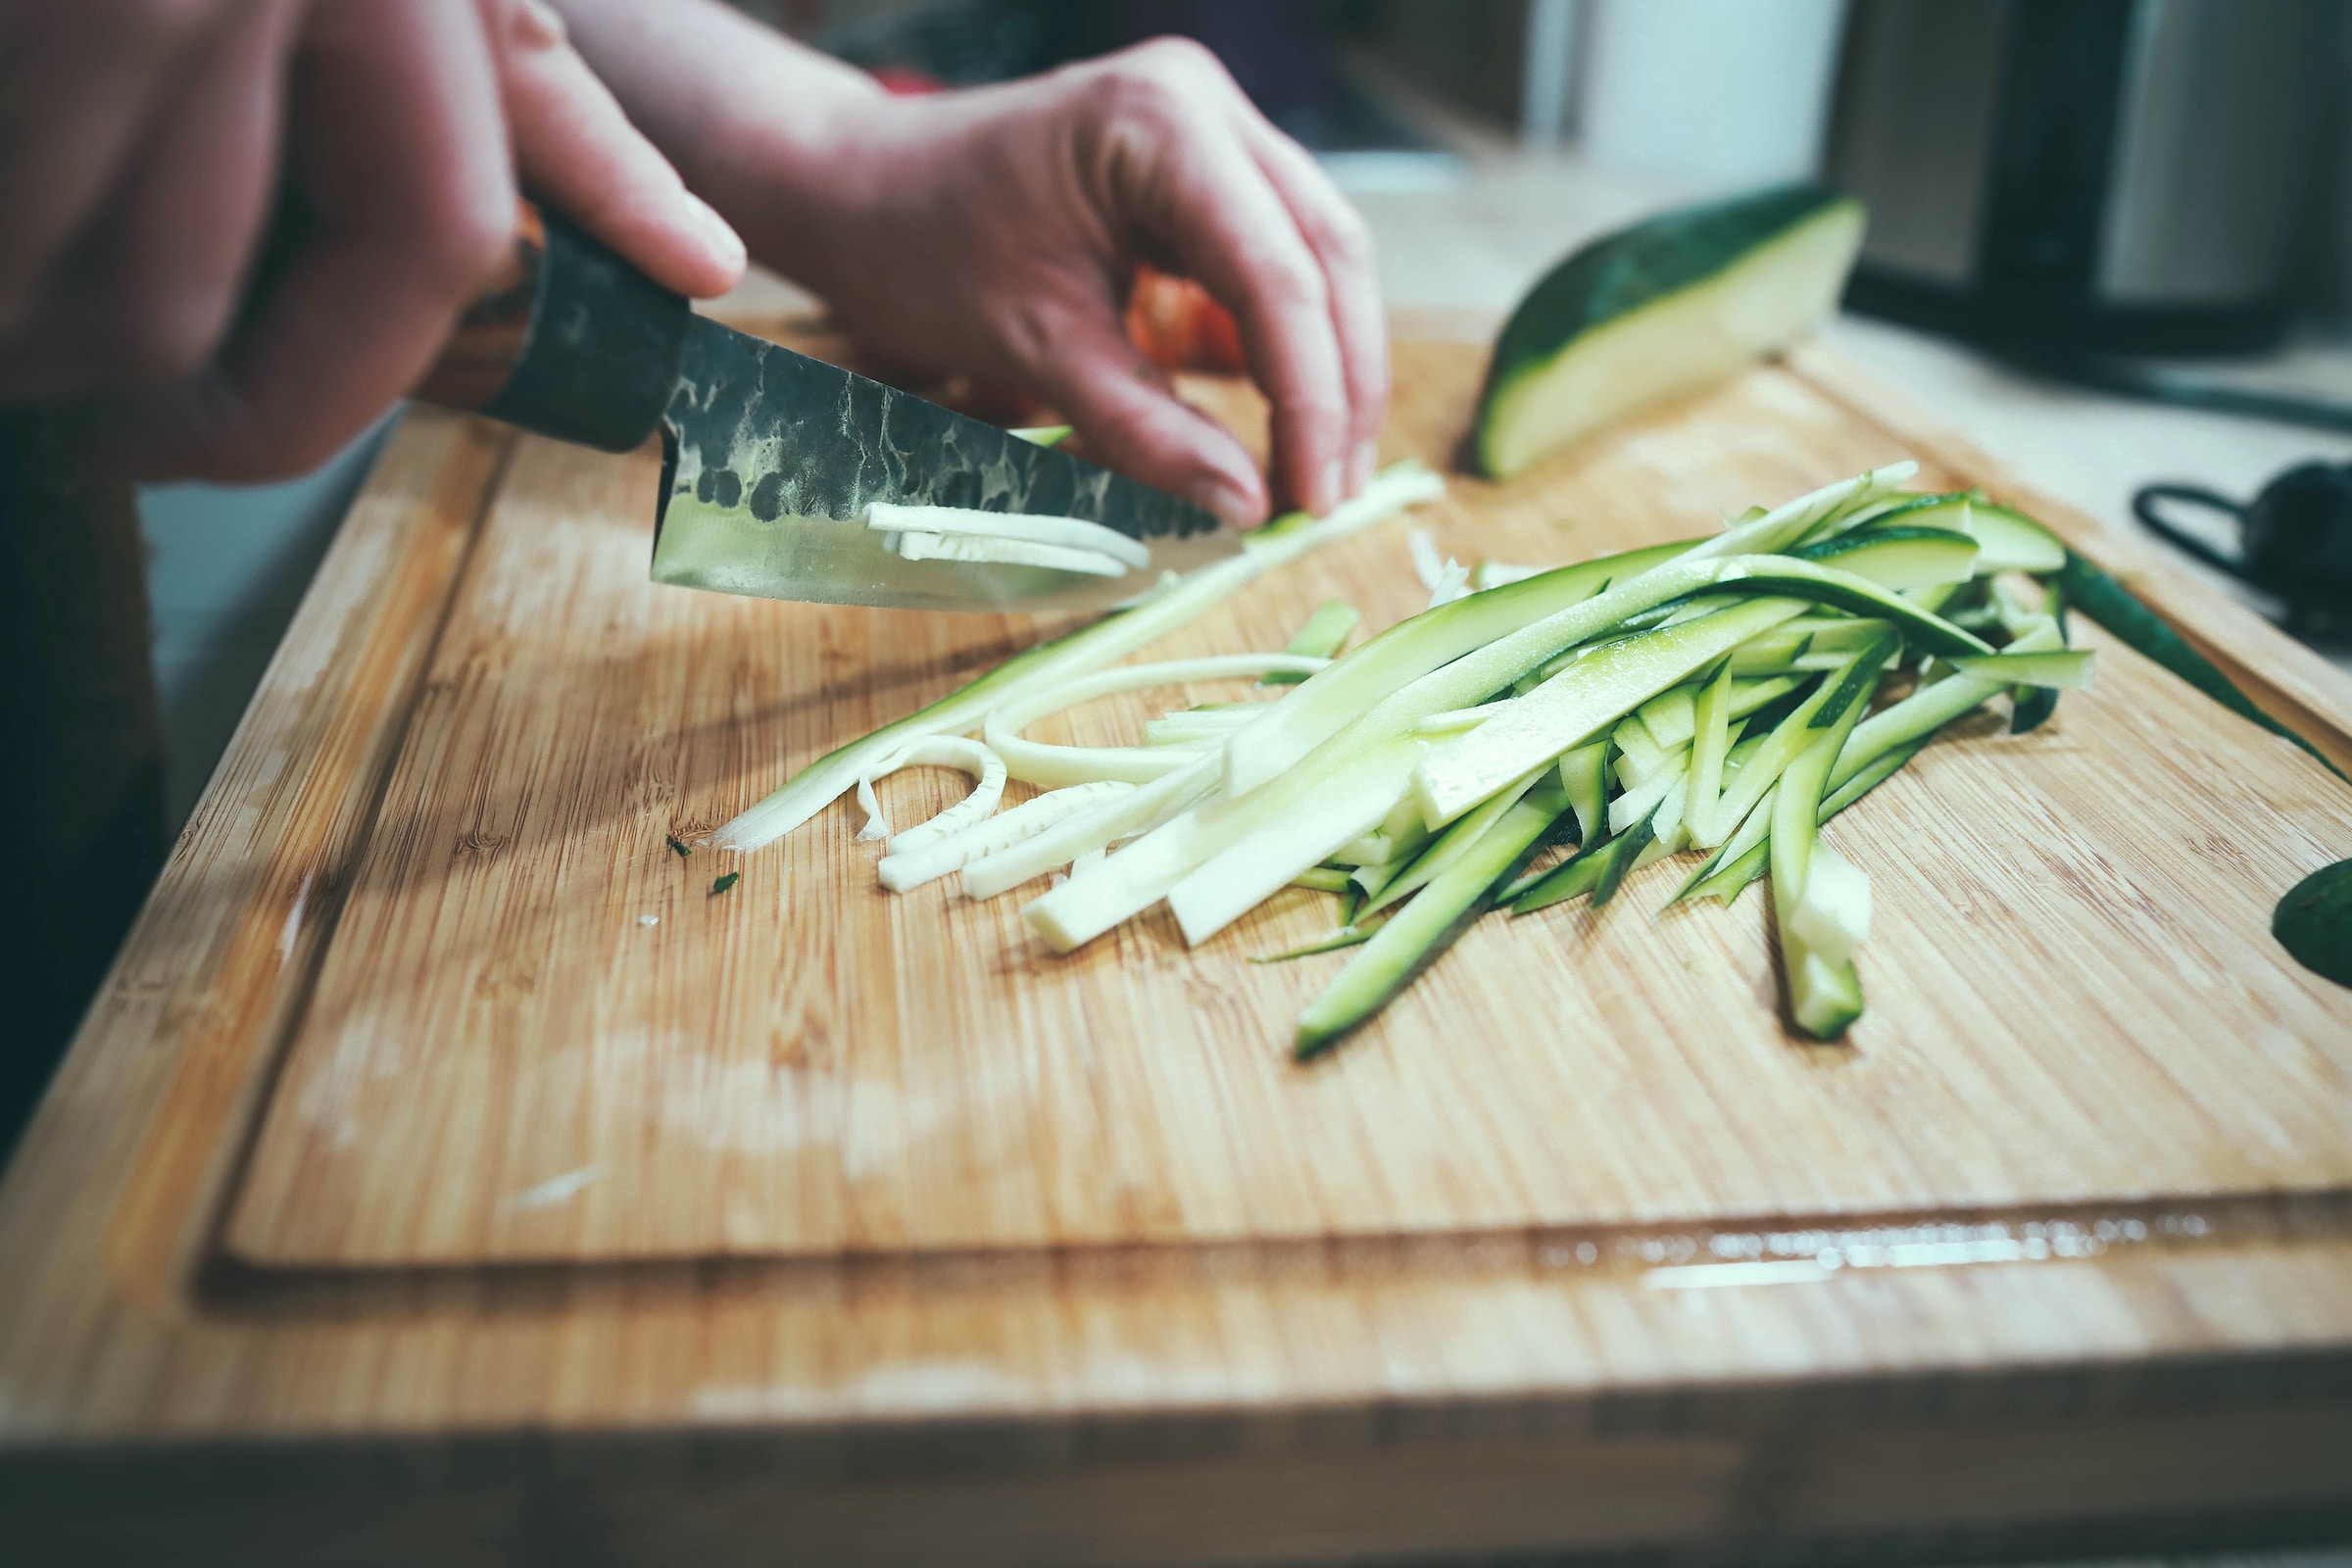 Person chopping vegetables | Source: Unsplash